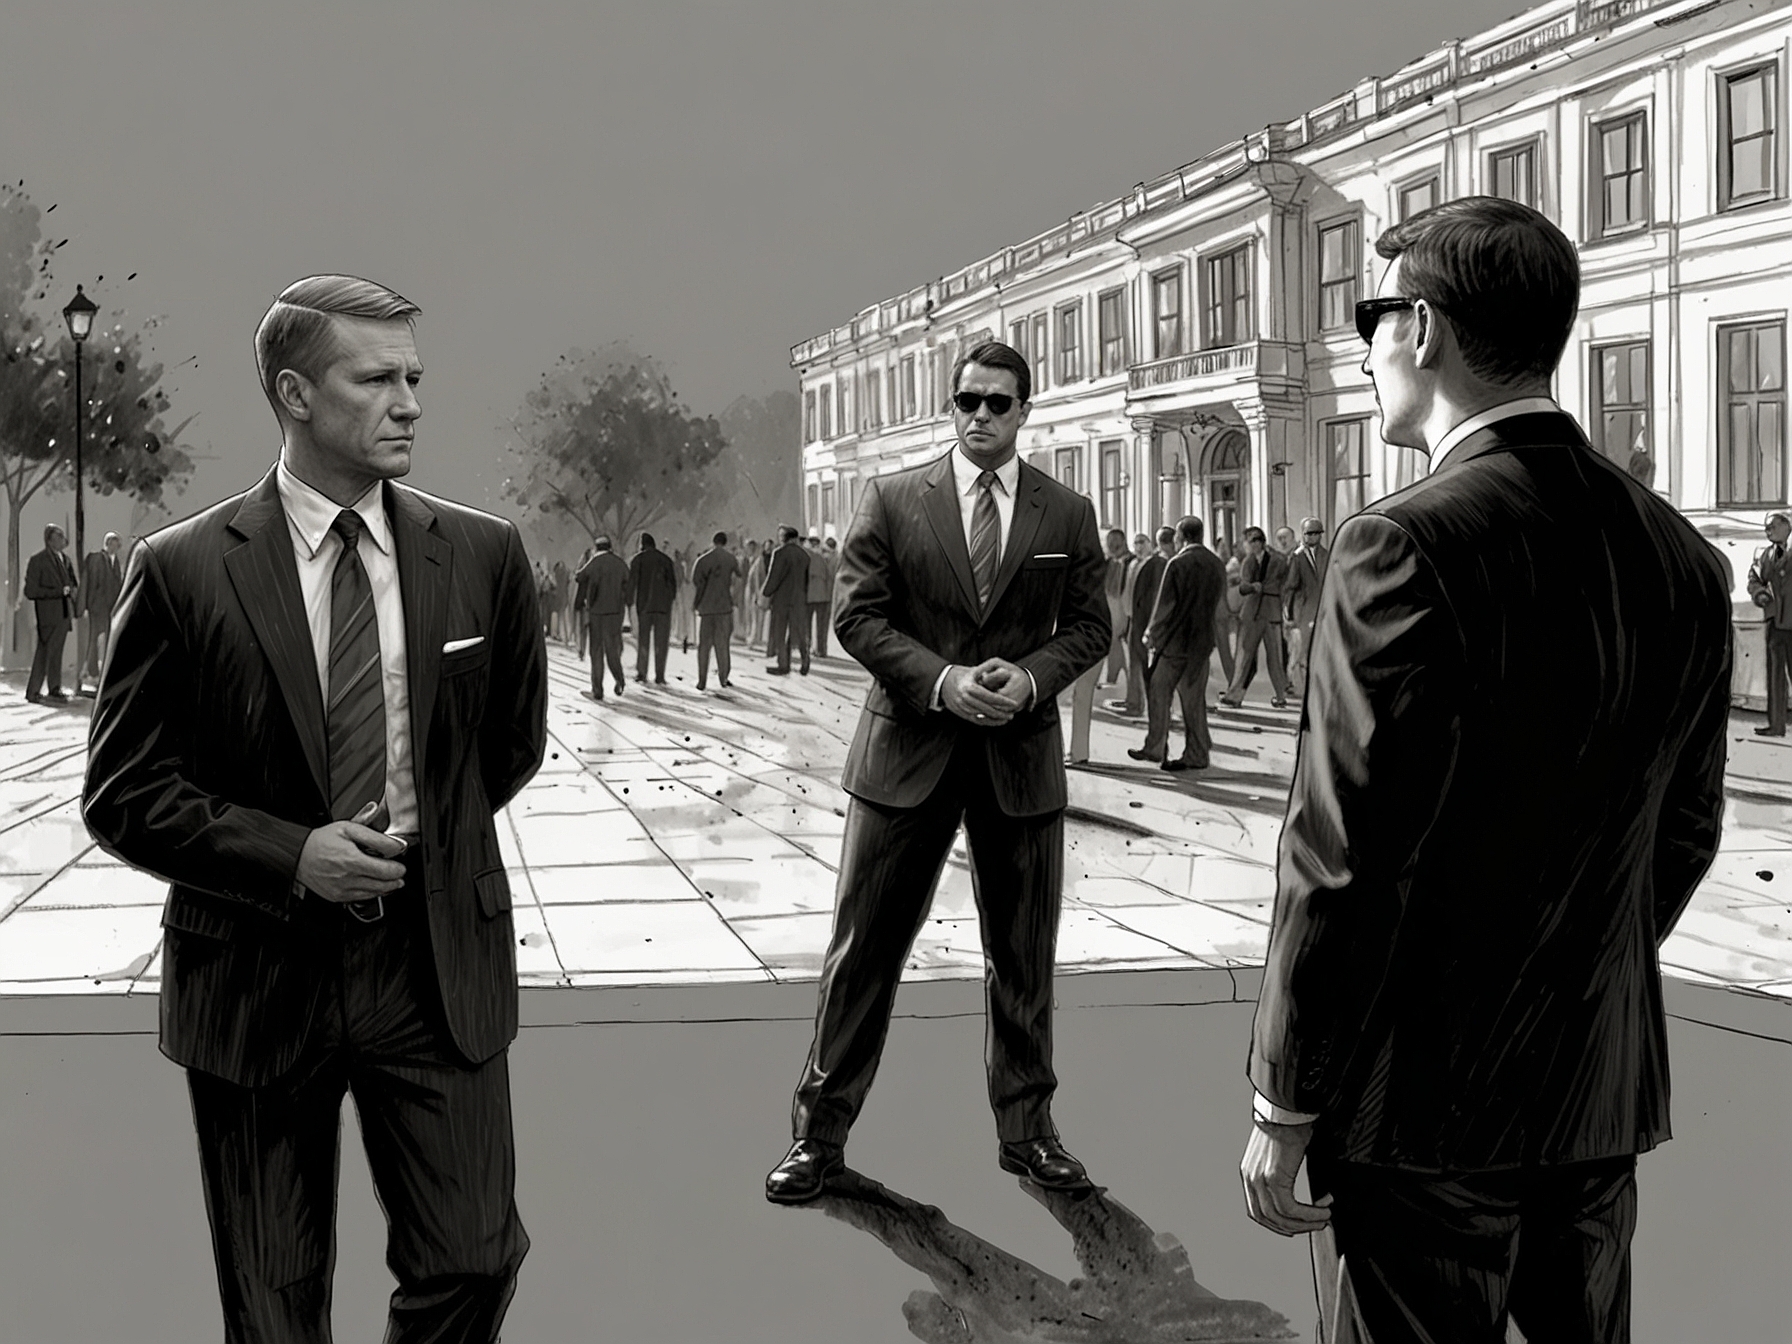 Image depicting a tense moment with a Secret Service agent facing armed assailants, highlighting security vulnerabilities during high-profile visits.